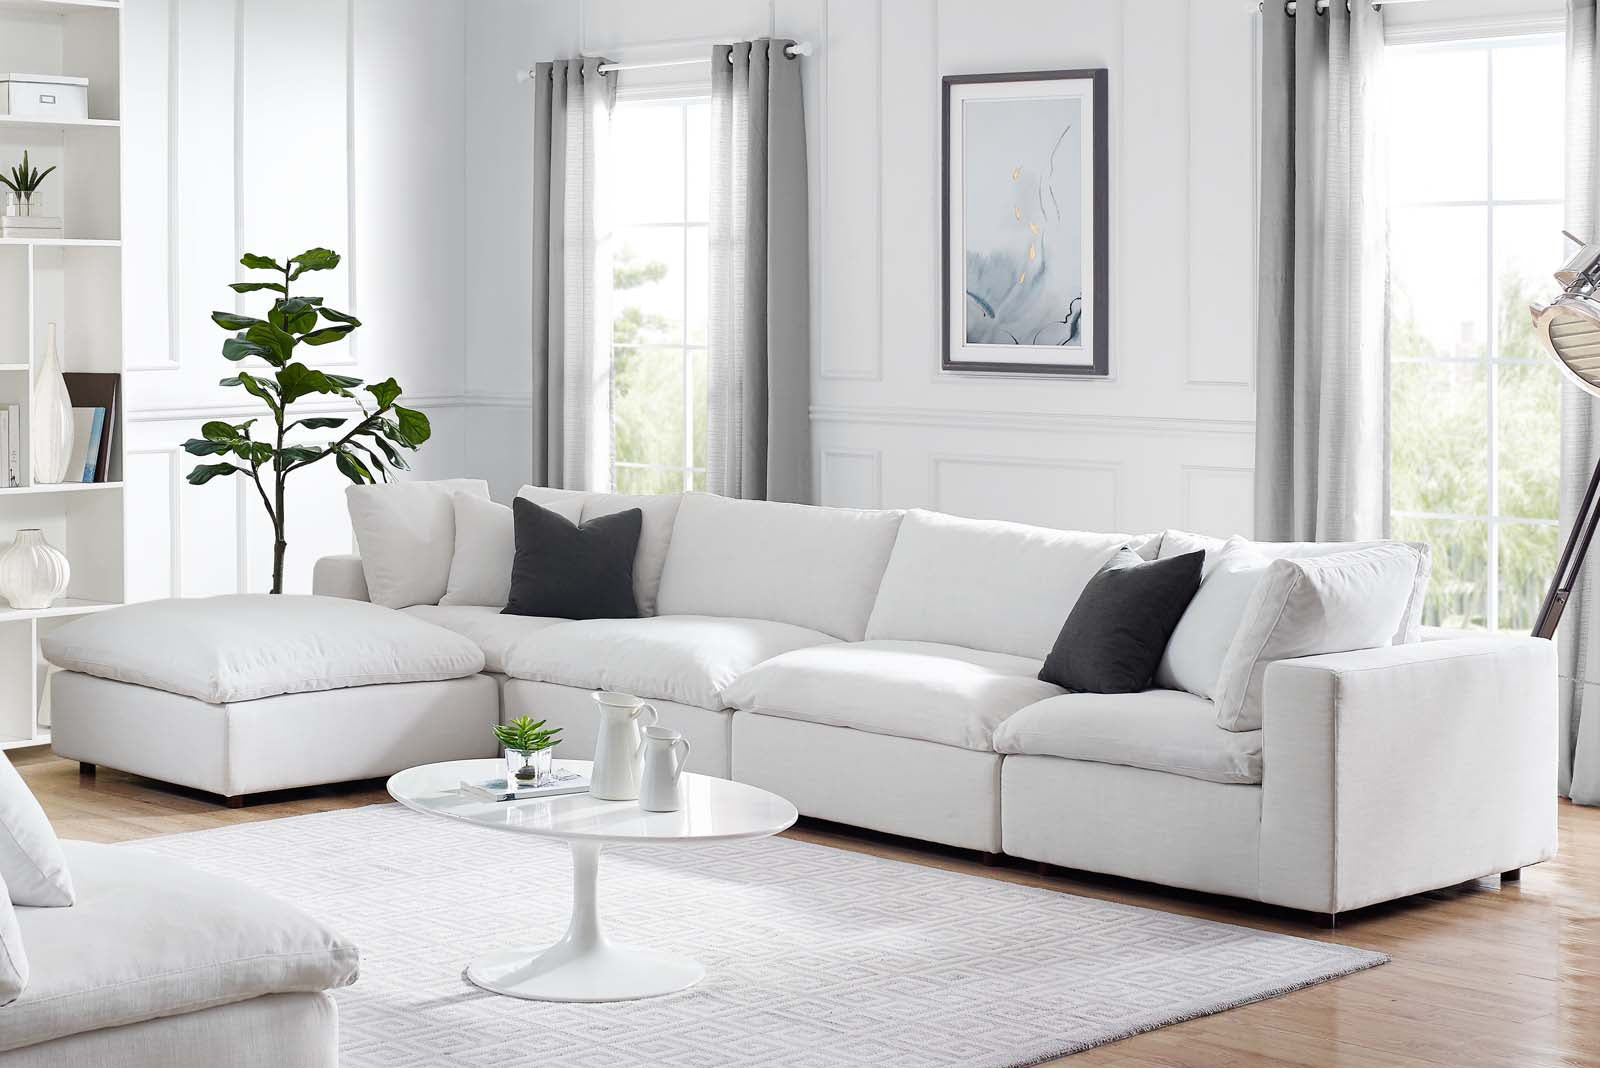 Shop Homethreads for the best Value on Commix Sectional Sofas | Homethreads